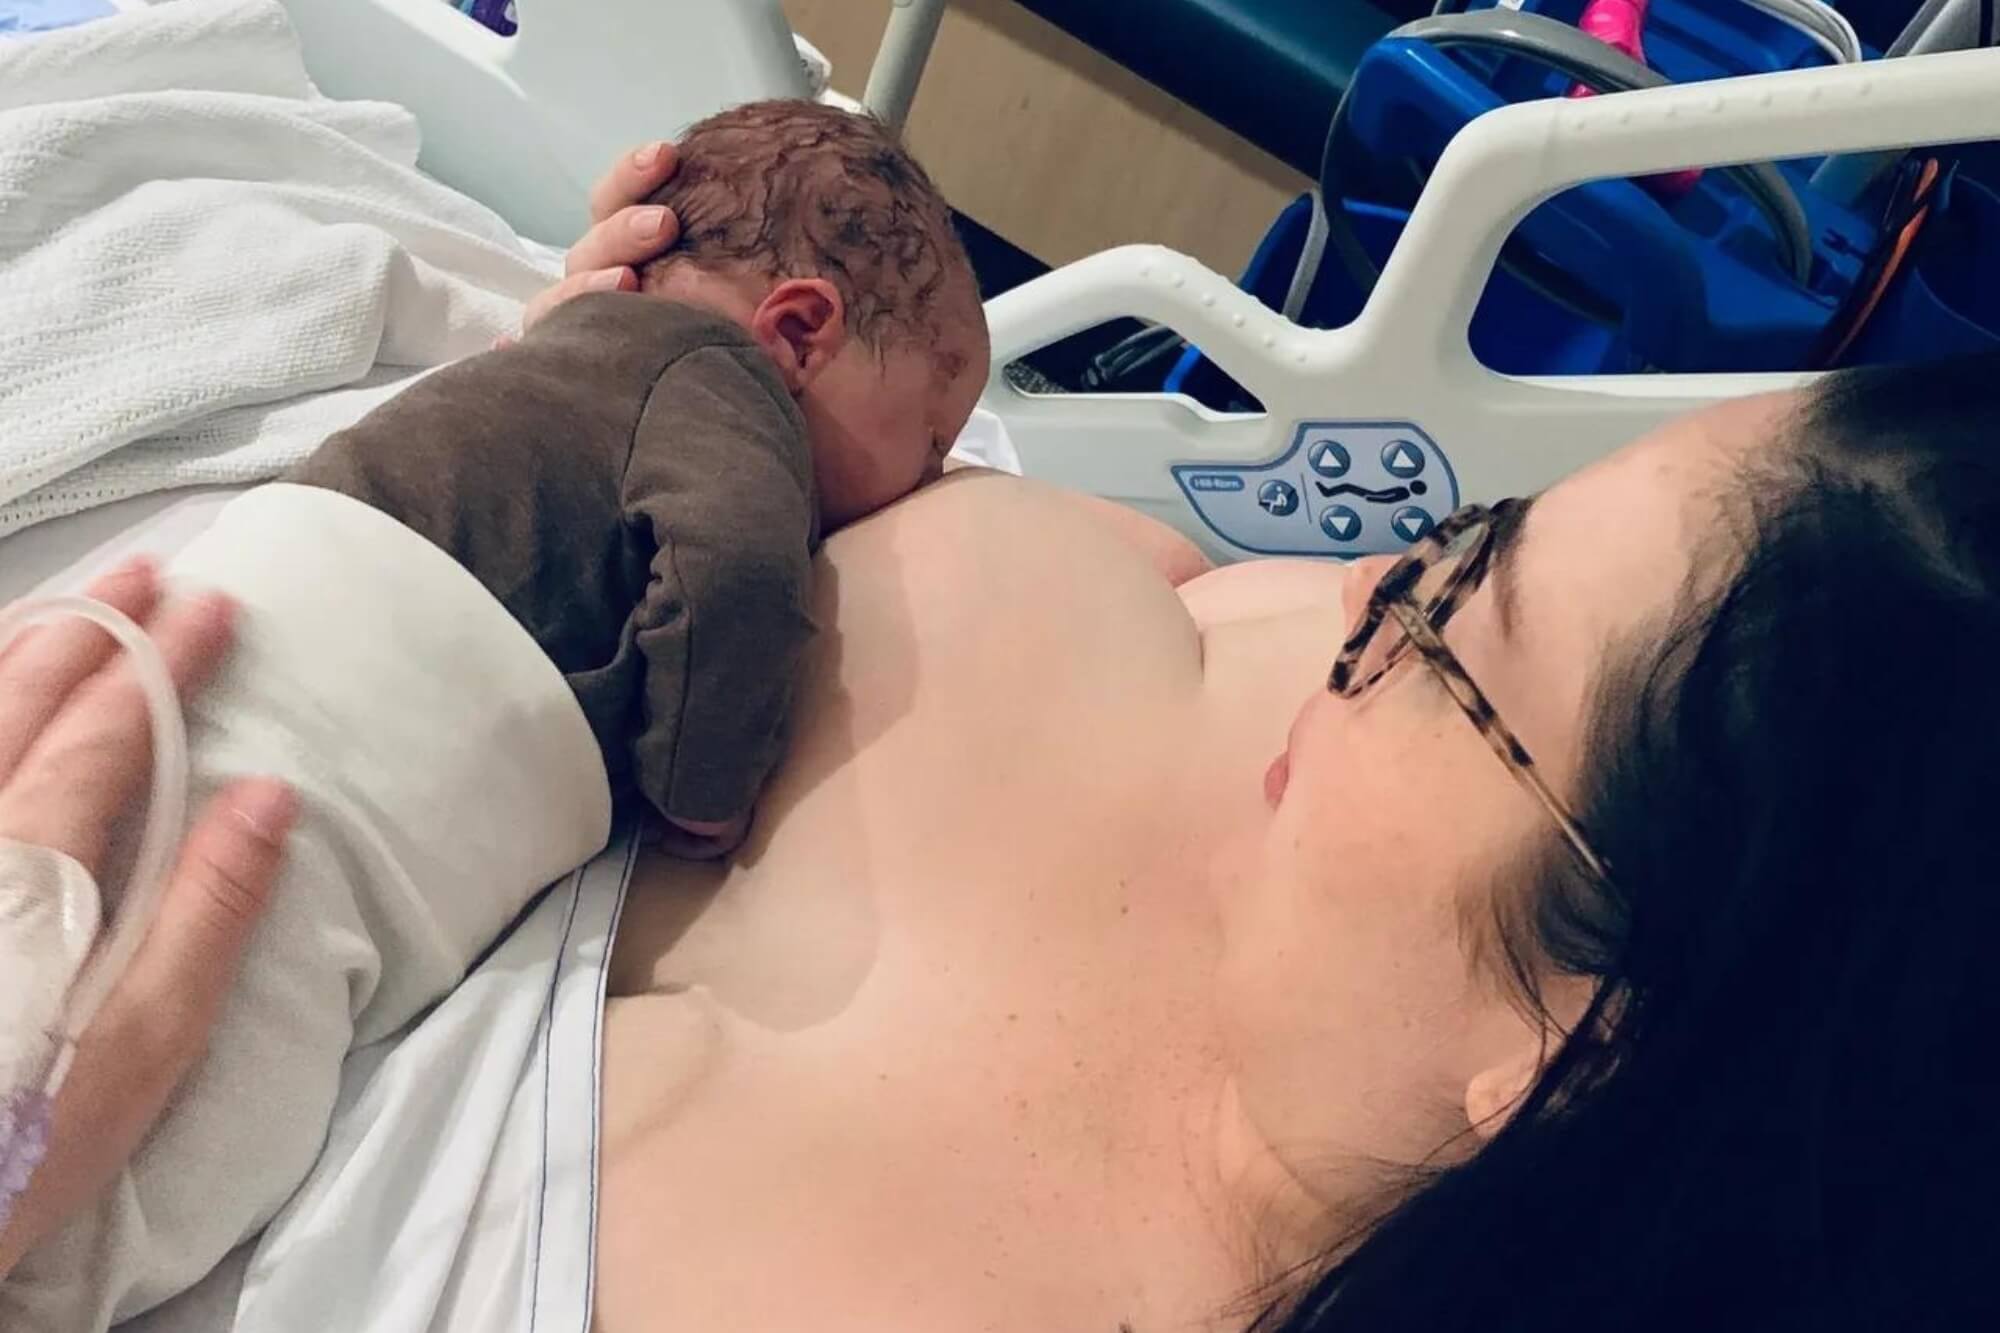 Mother in a hospital bed initiating breastfeeding with her baby after a c-section